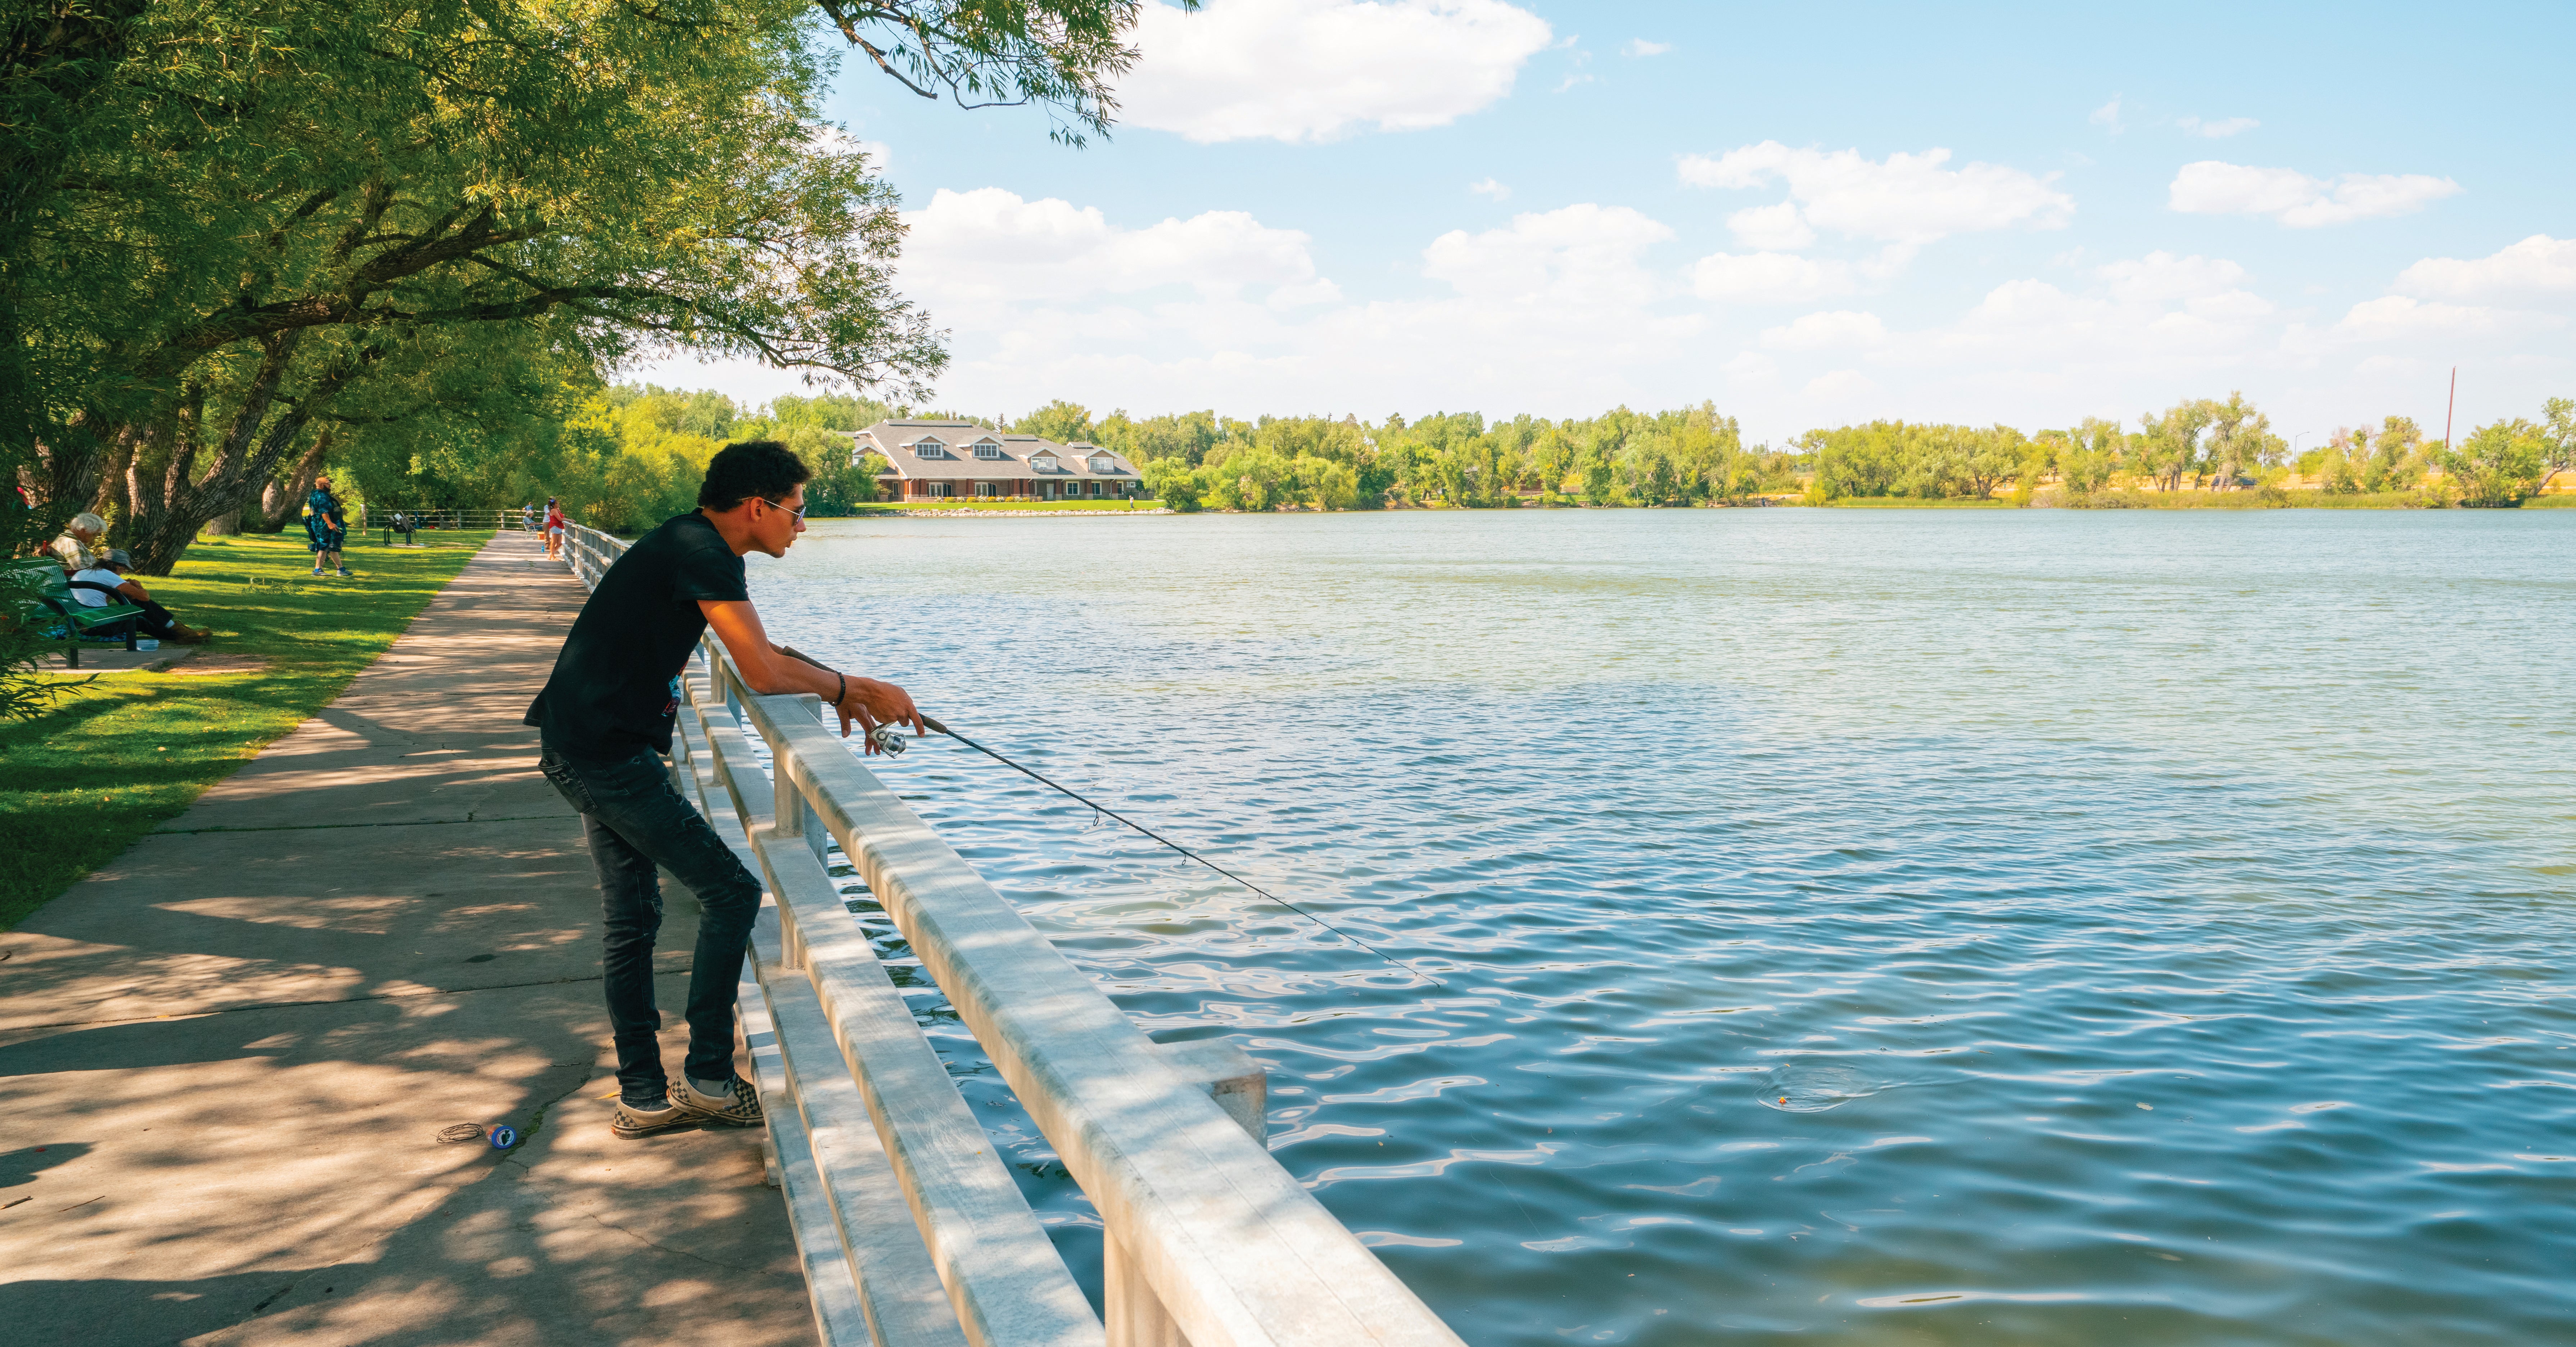 An angler rests up against a railing at the edge of Sloans lake in Cheyenne Wyoming and watches the end of his line in the water for a bite.